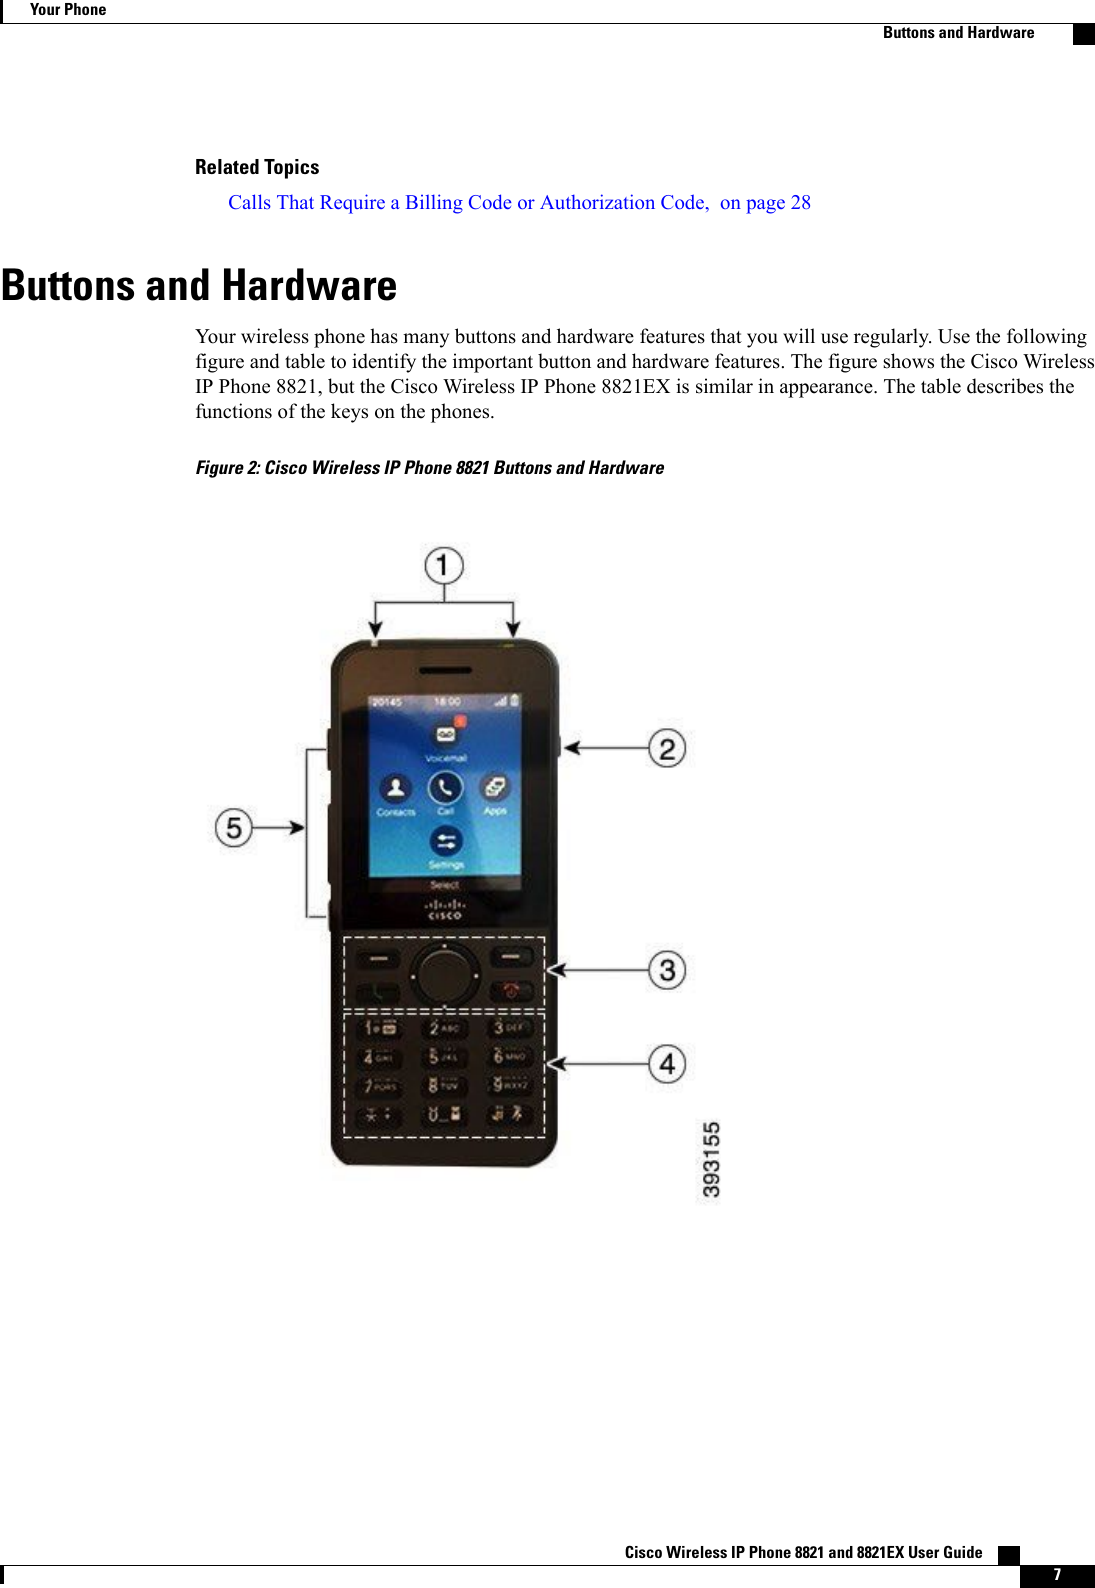 Related TopicsCalls That Require a Billing Code or Authorization Code, on page 28Buttons and HardwareYour wireless phone has many buttons and hardware features that you will use regularly. Use the followingfigure and table to identify the important button and hardware features. The figure shows the Cisco WirelessIP Phone 8821, but the Cisco Wireless IP Phone 8821EX is similar in appearance. The table describes thefunctions of the keys on the phones.Figure 2: Cisco Wireless IP Phone 8821 Buttons and HardwareCisco Wireless IP Phone 8821 and 8821EX User Guide    7Your PhoneButtons and Hardware